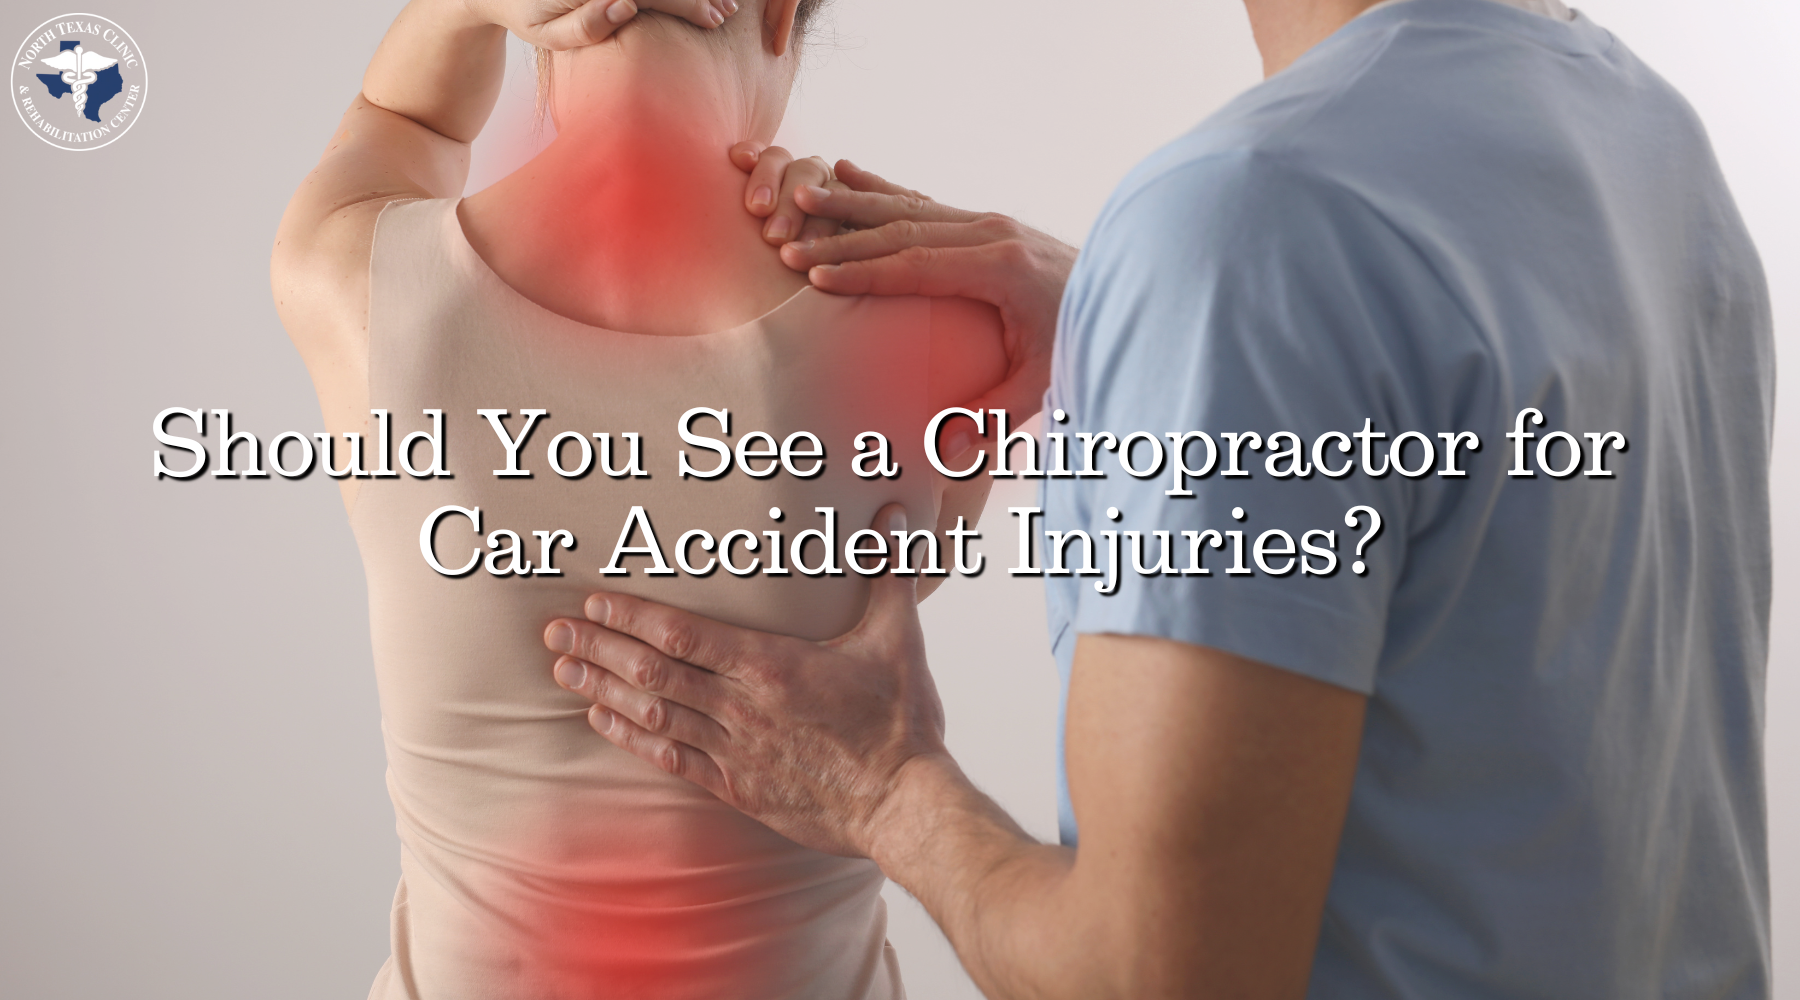 Should You See a Chiropractor for Car Accident Injuries? (Header)